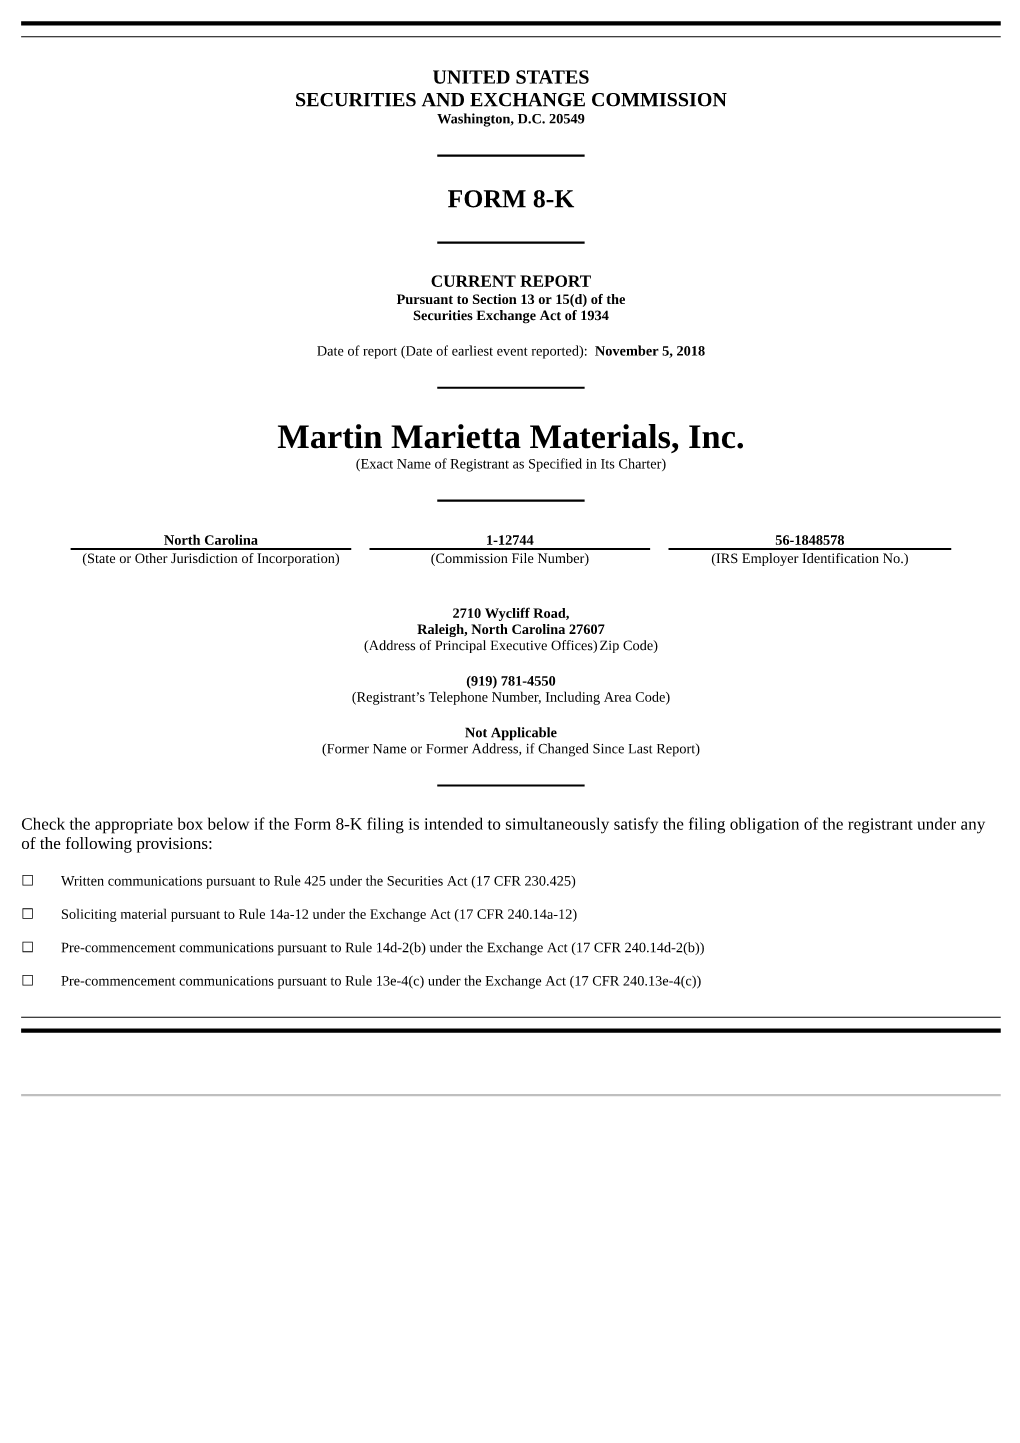 Martin Marietta Materials, Inc. (Exact Name of Registrant As Specified in Its Charter)